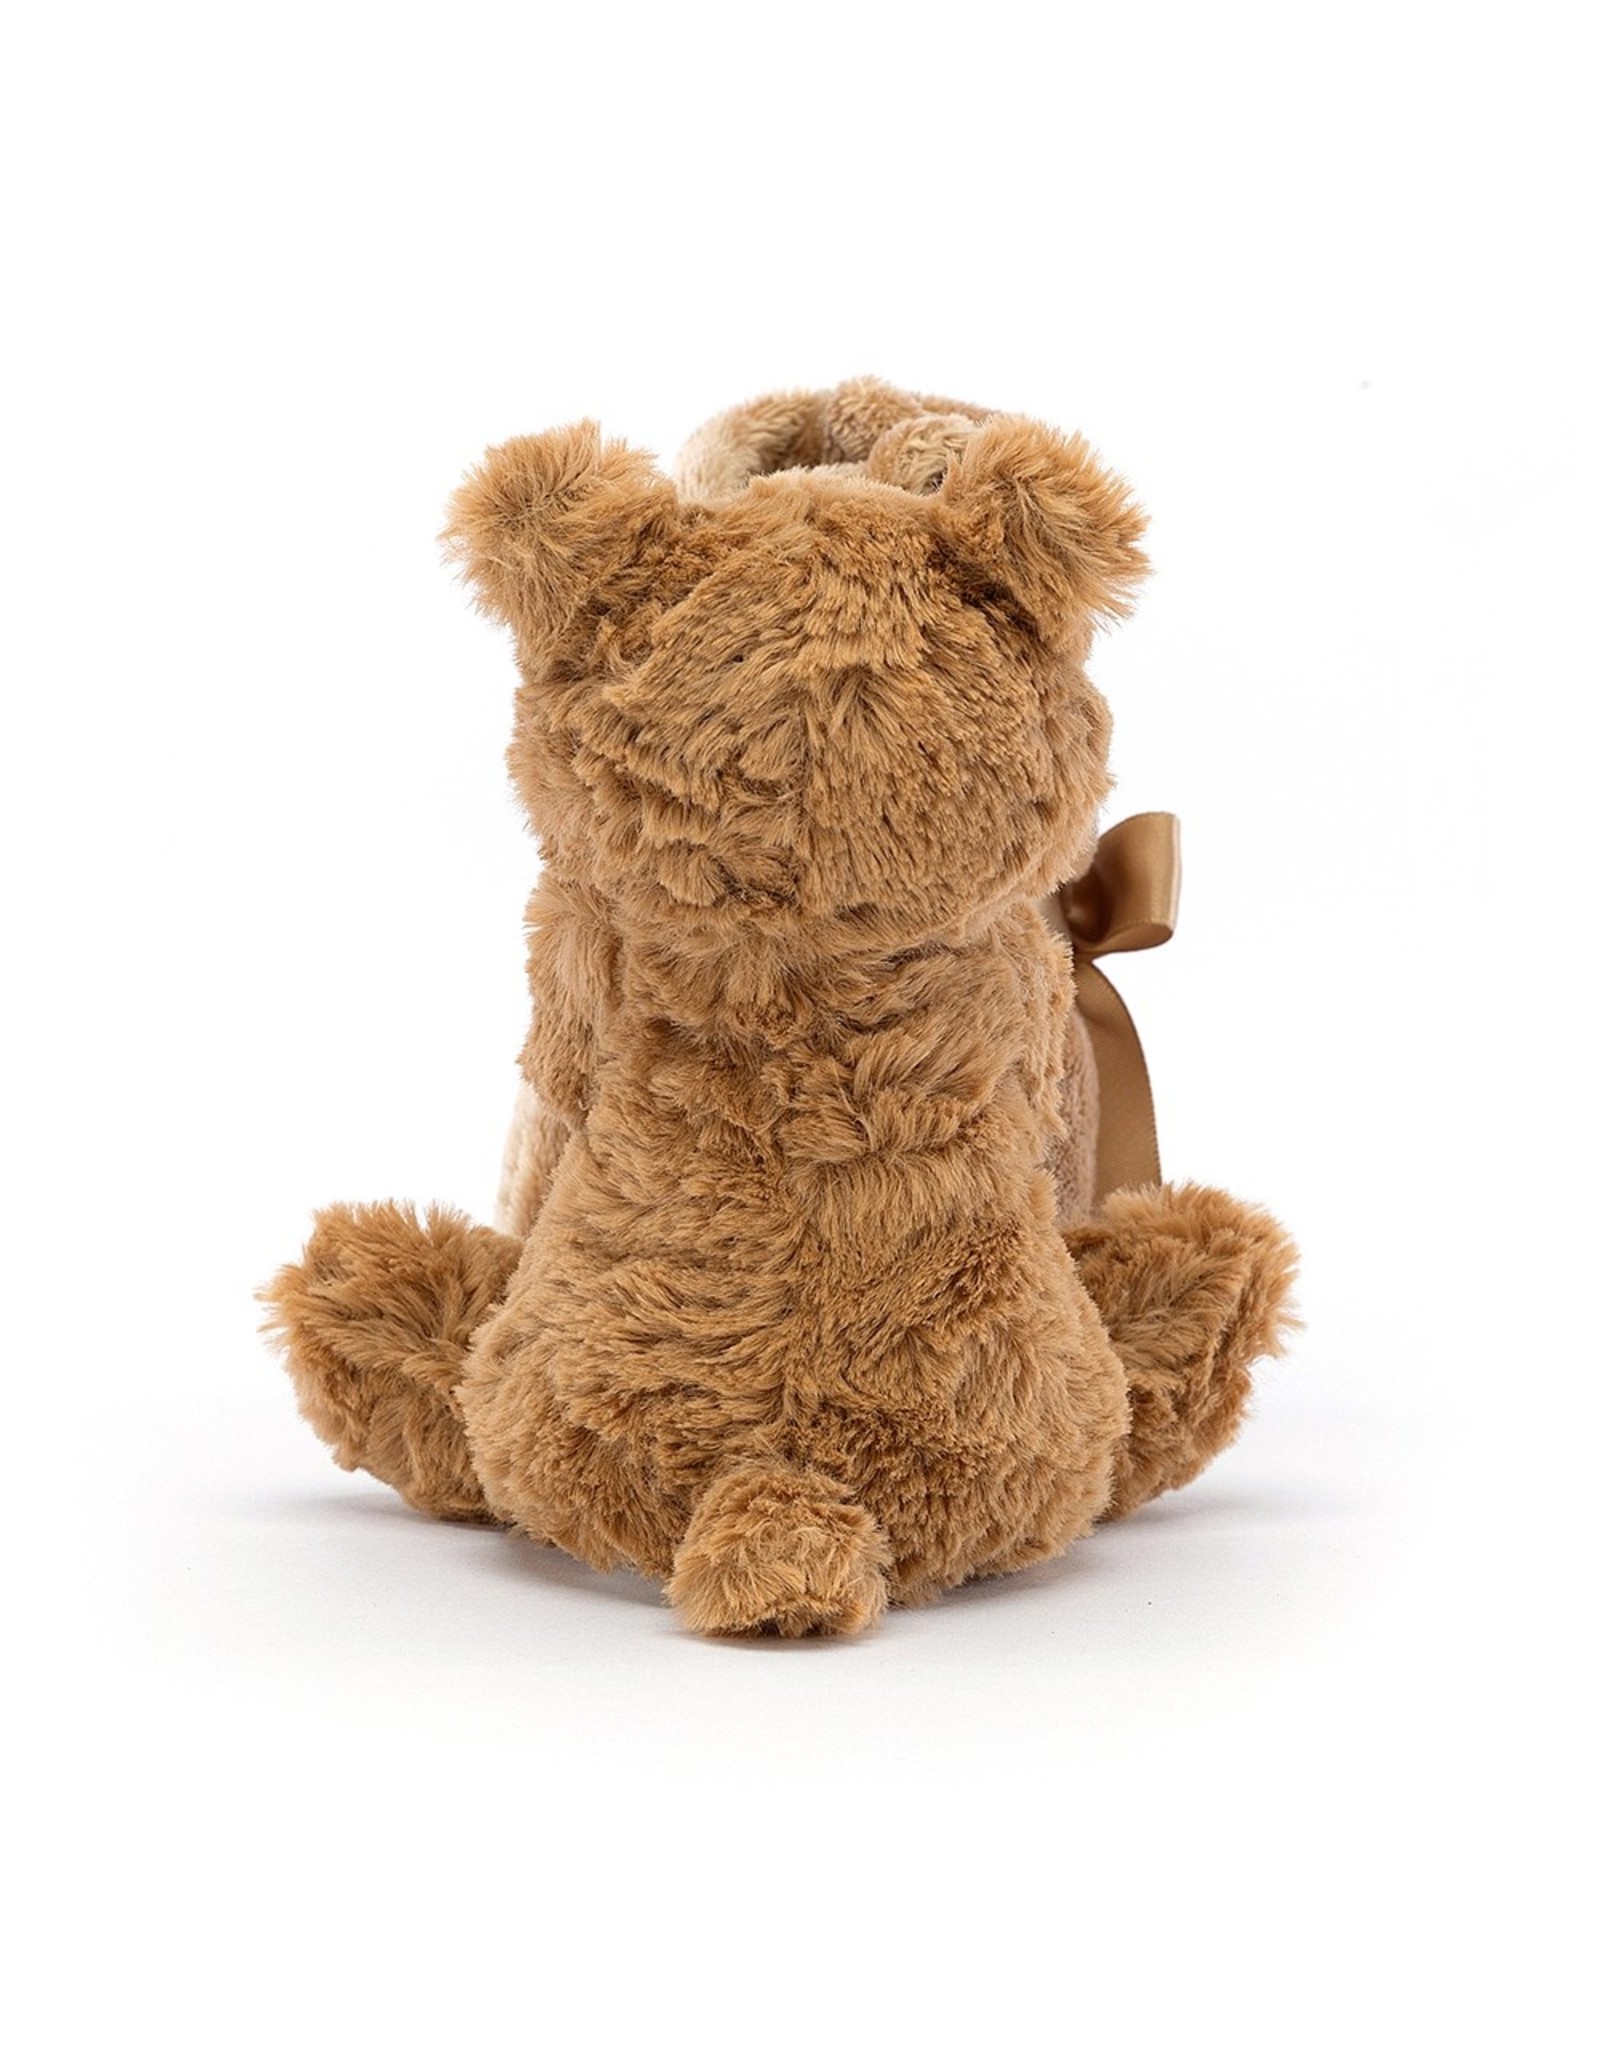 Jellycat Bartholomew bear soother